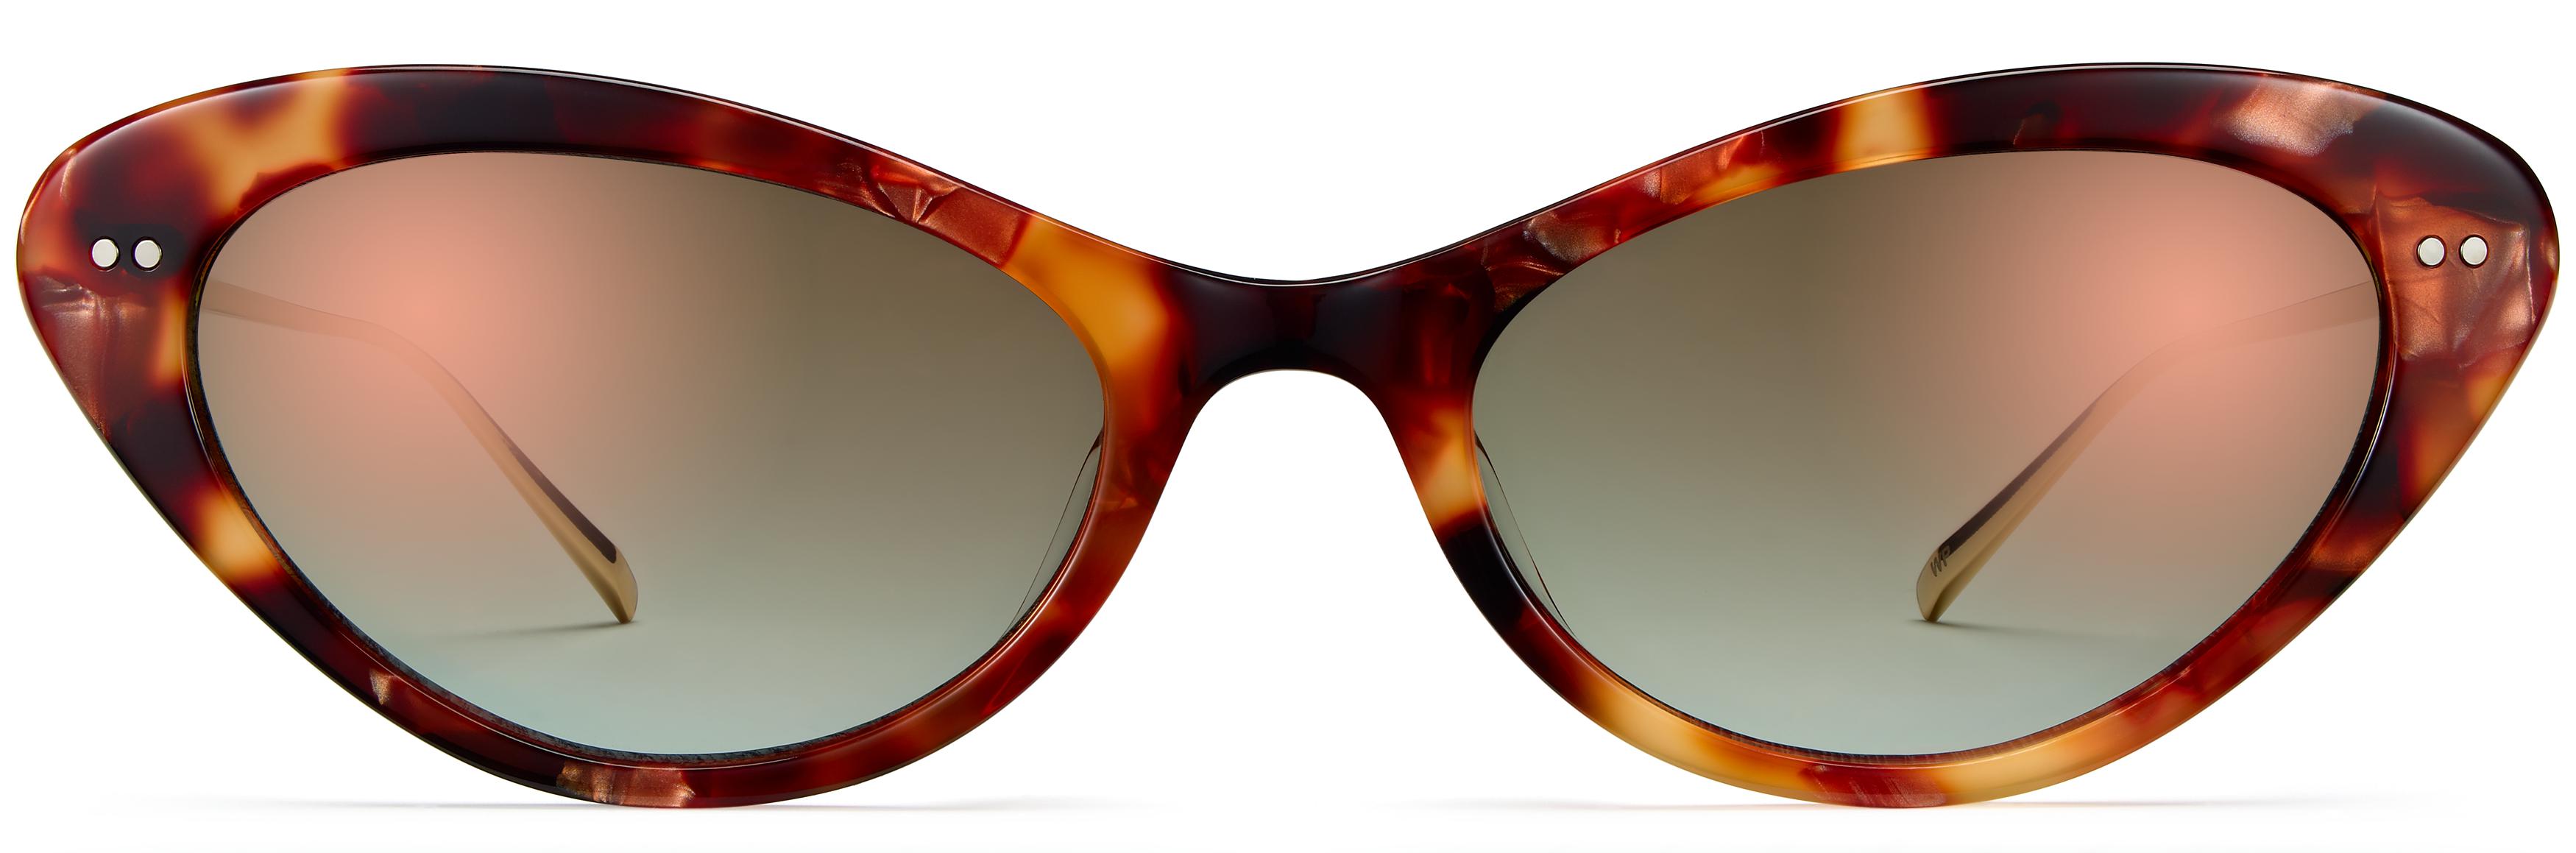 Naomi Sunglasses in Copper Leaf Tortoise with Gold | Warby Parker